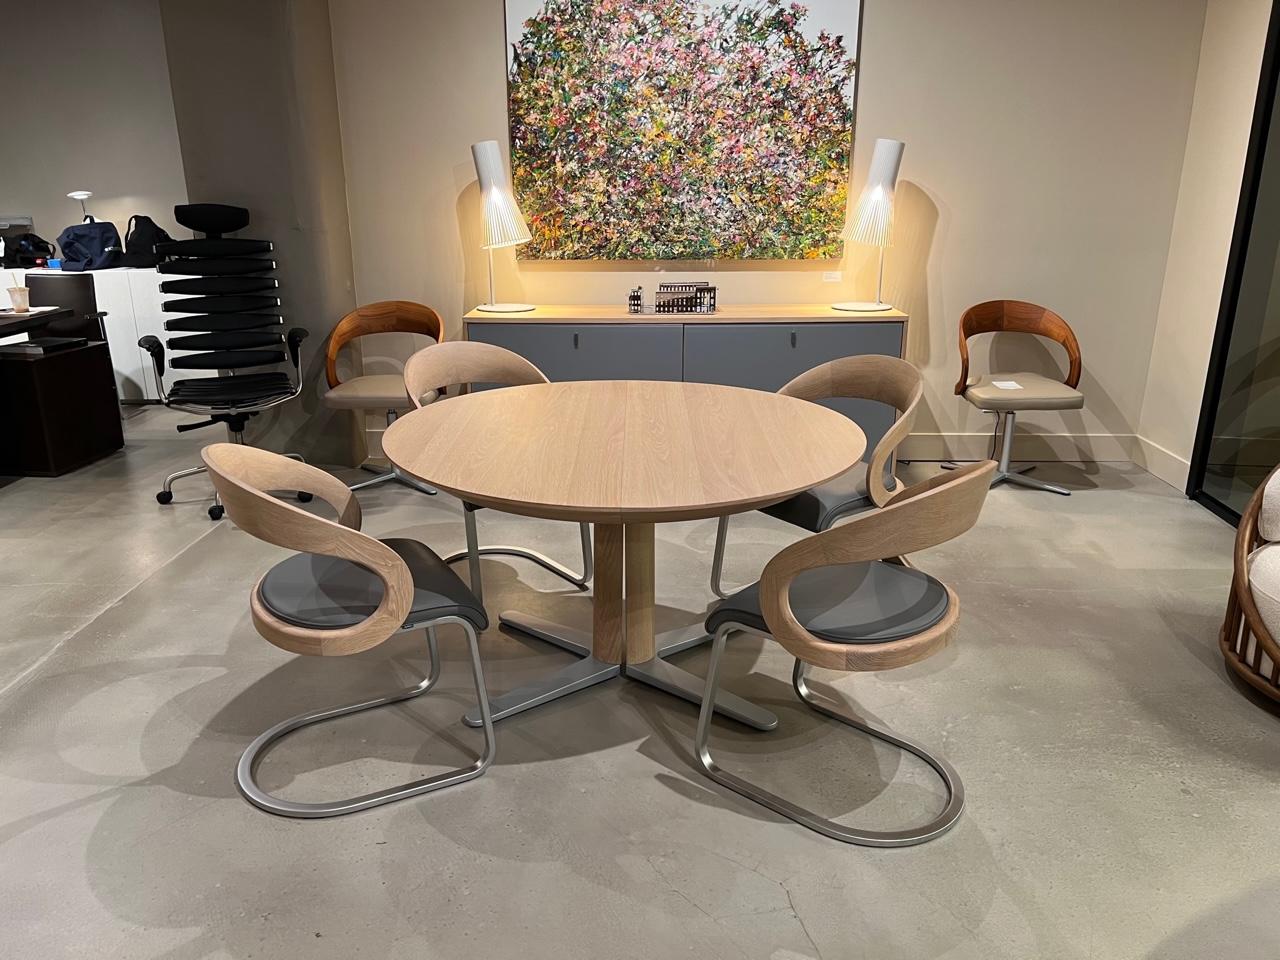 Girado Extending table in white oiled oak and matte grey glass insert. 
Feet in matte aluminum. 

The table closed is a round and opens into an oval.  The self storing leaf features a soft closing butterfly mechanism. 

Dimensions:
51